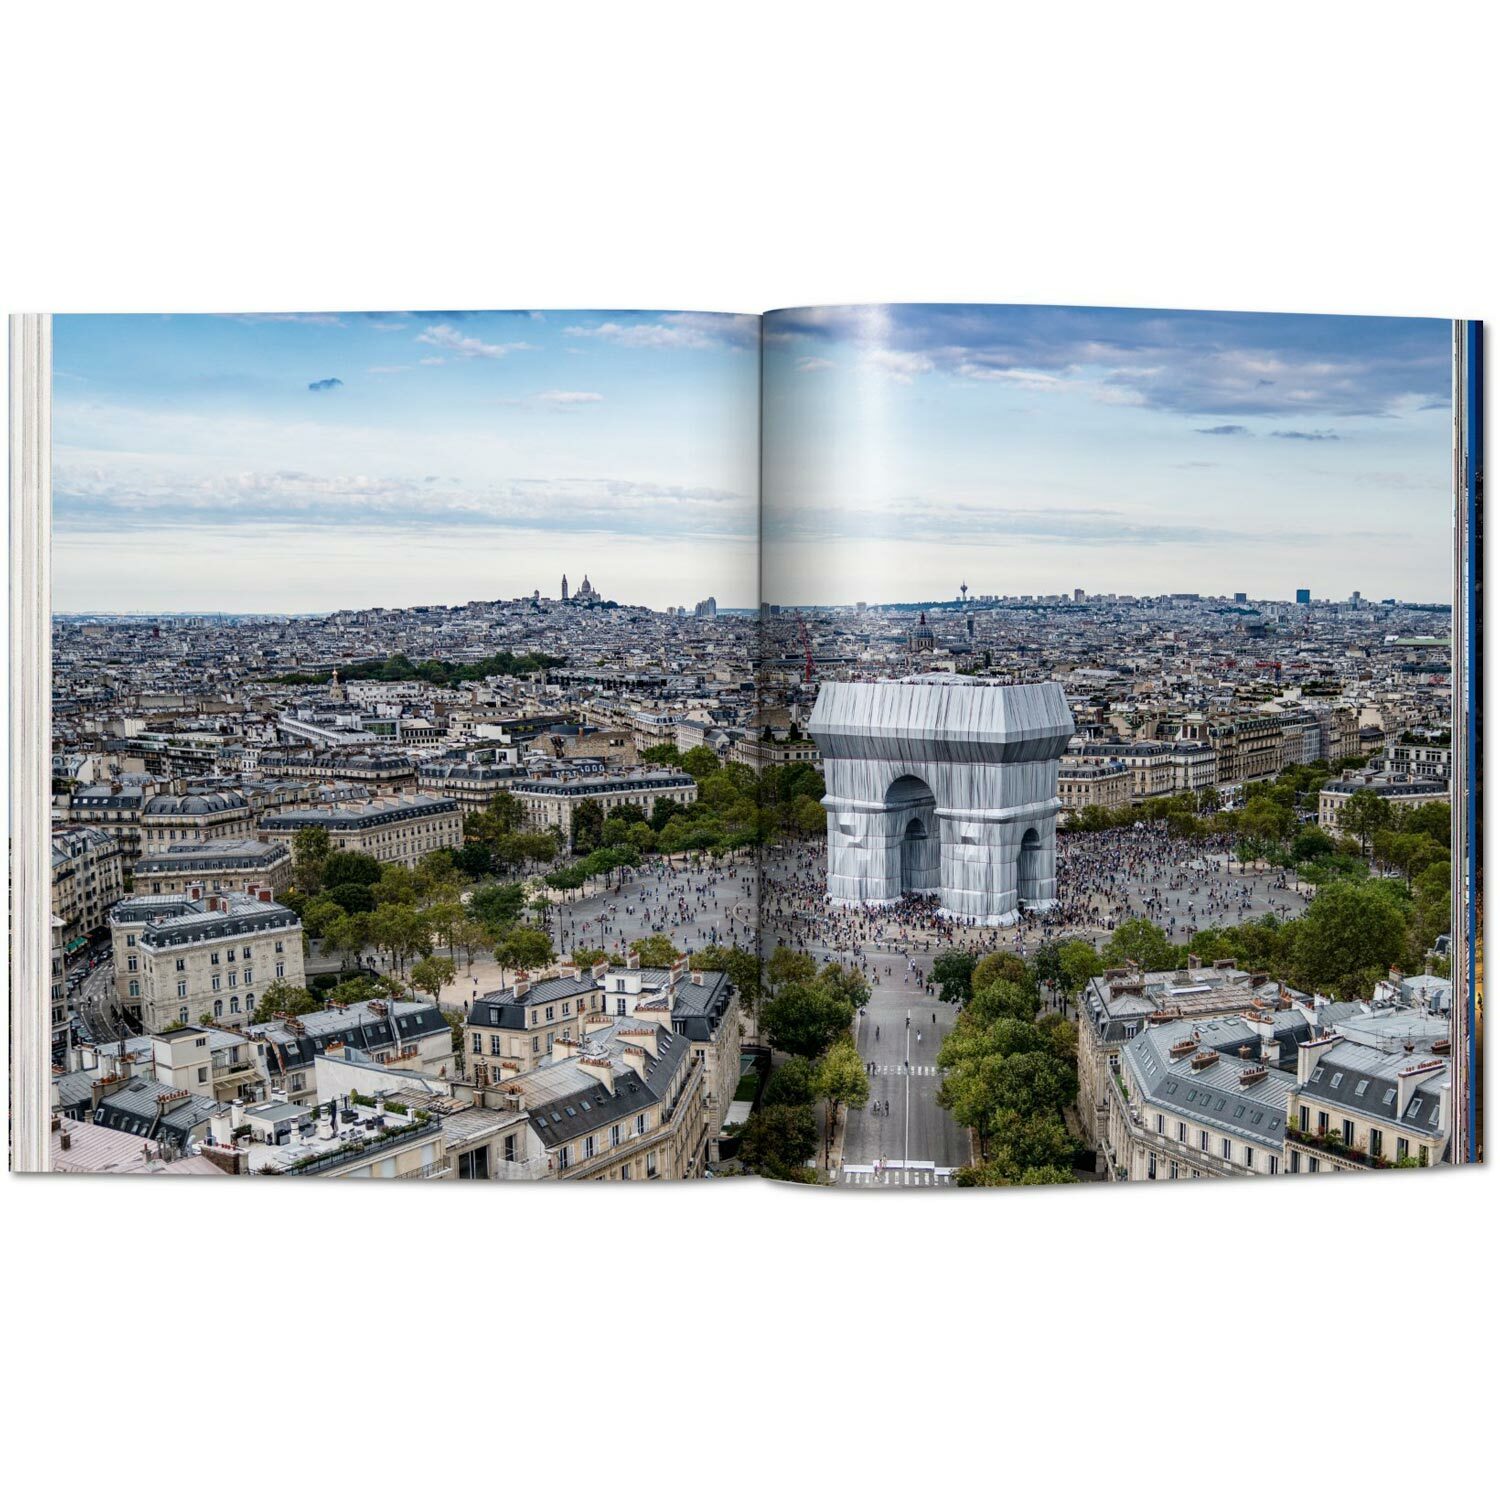 Christo and Jeanne-Claude. L’Arc de Triomphe Wrapped